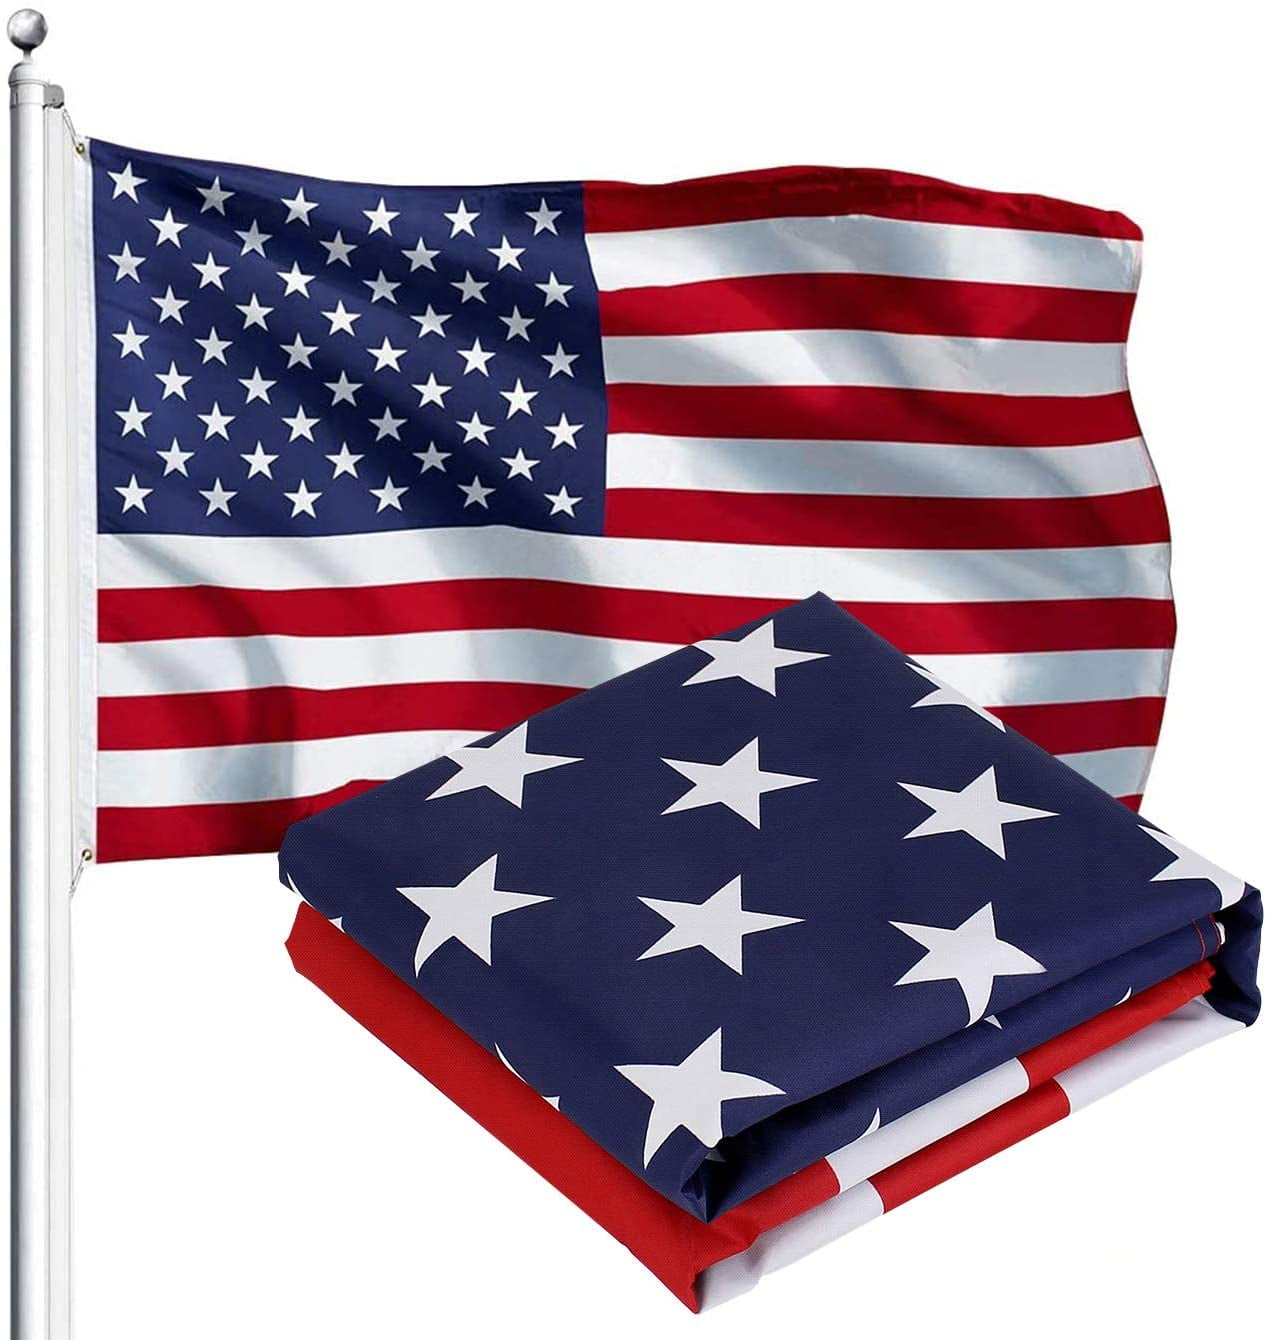 USA United States of America US Stars 4-Pack 3x5 American Flags w/ Grommets 